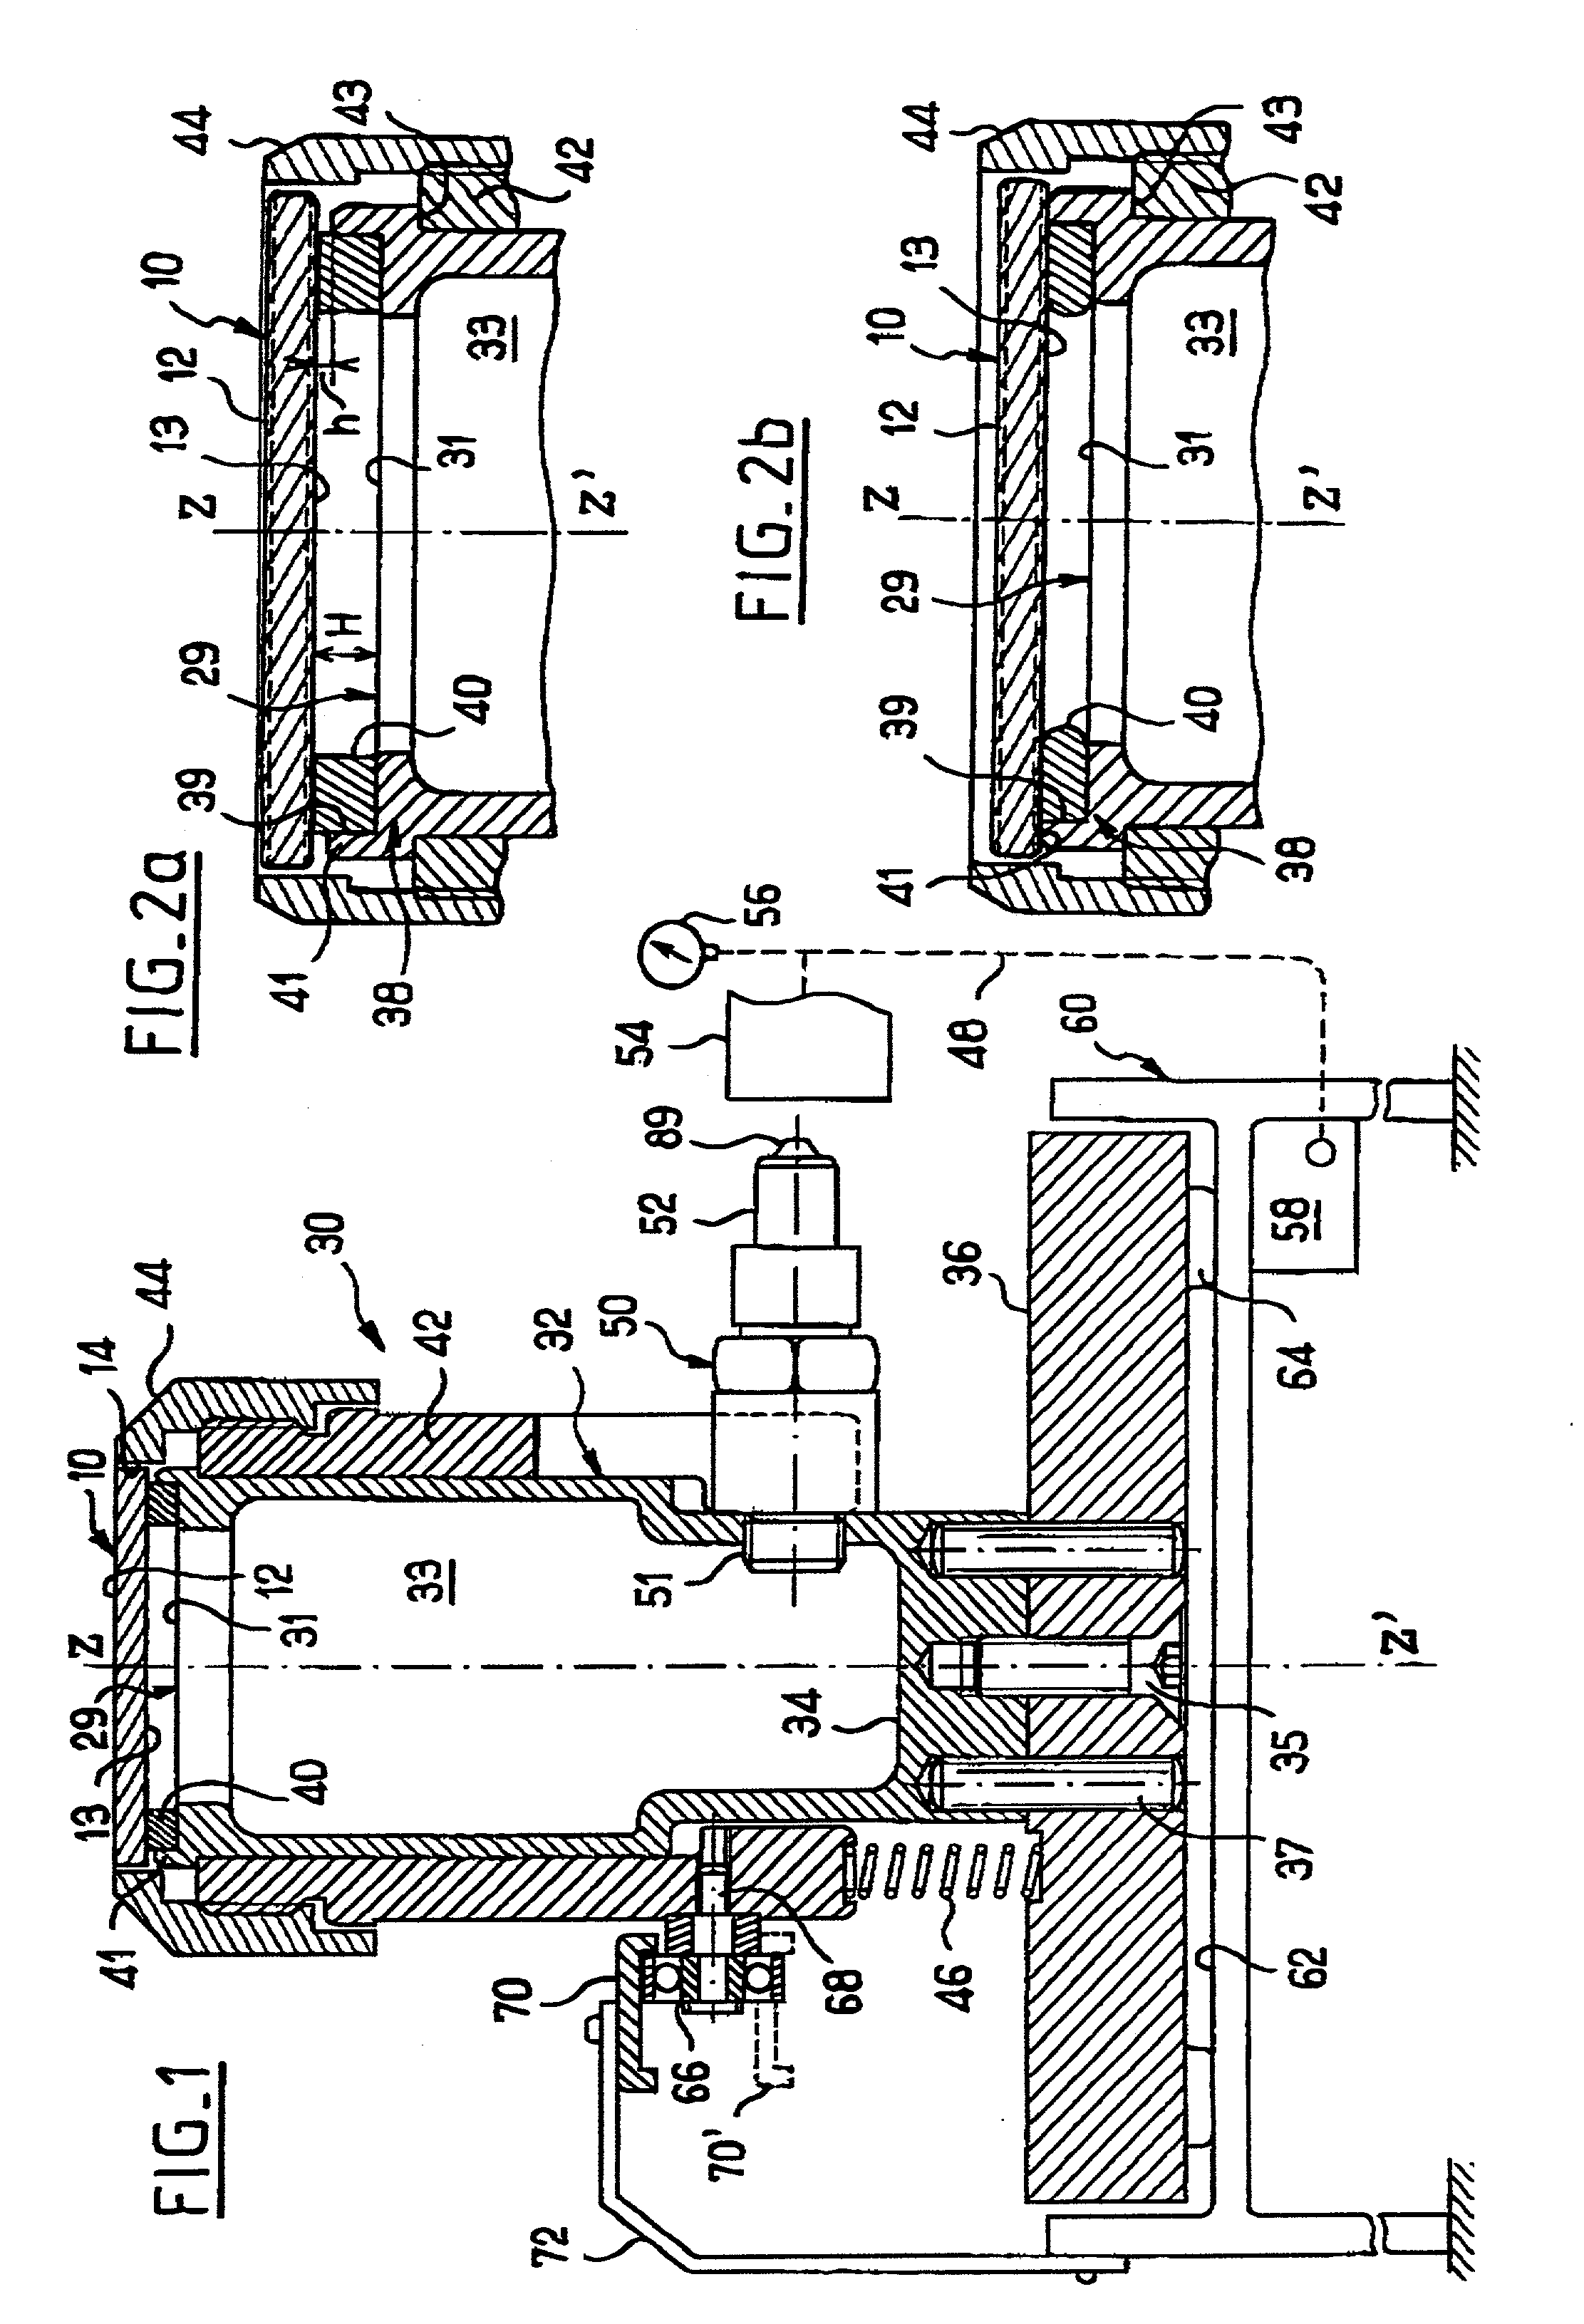 Chip holding arrangement, pad printing system incorporating the arrangement, and method of pad pringting a chip using the arrangement